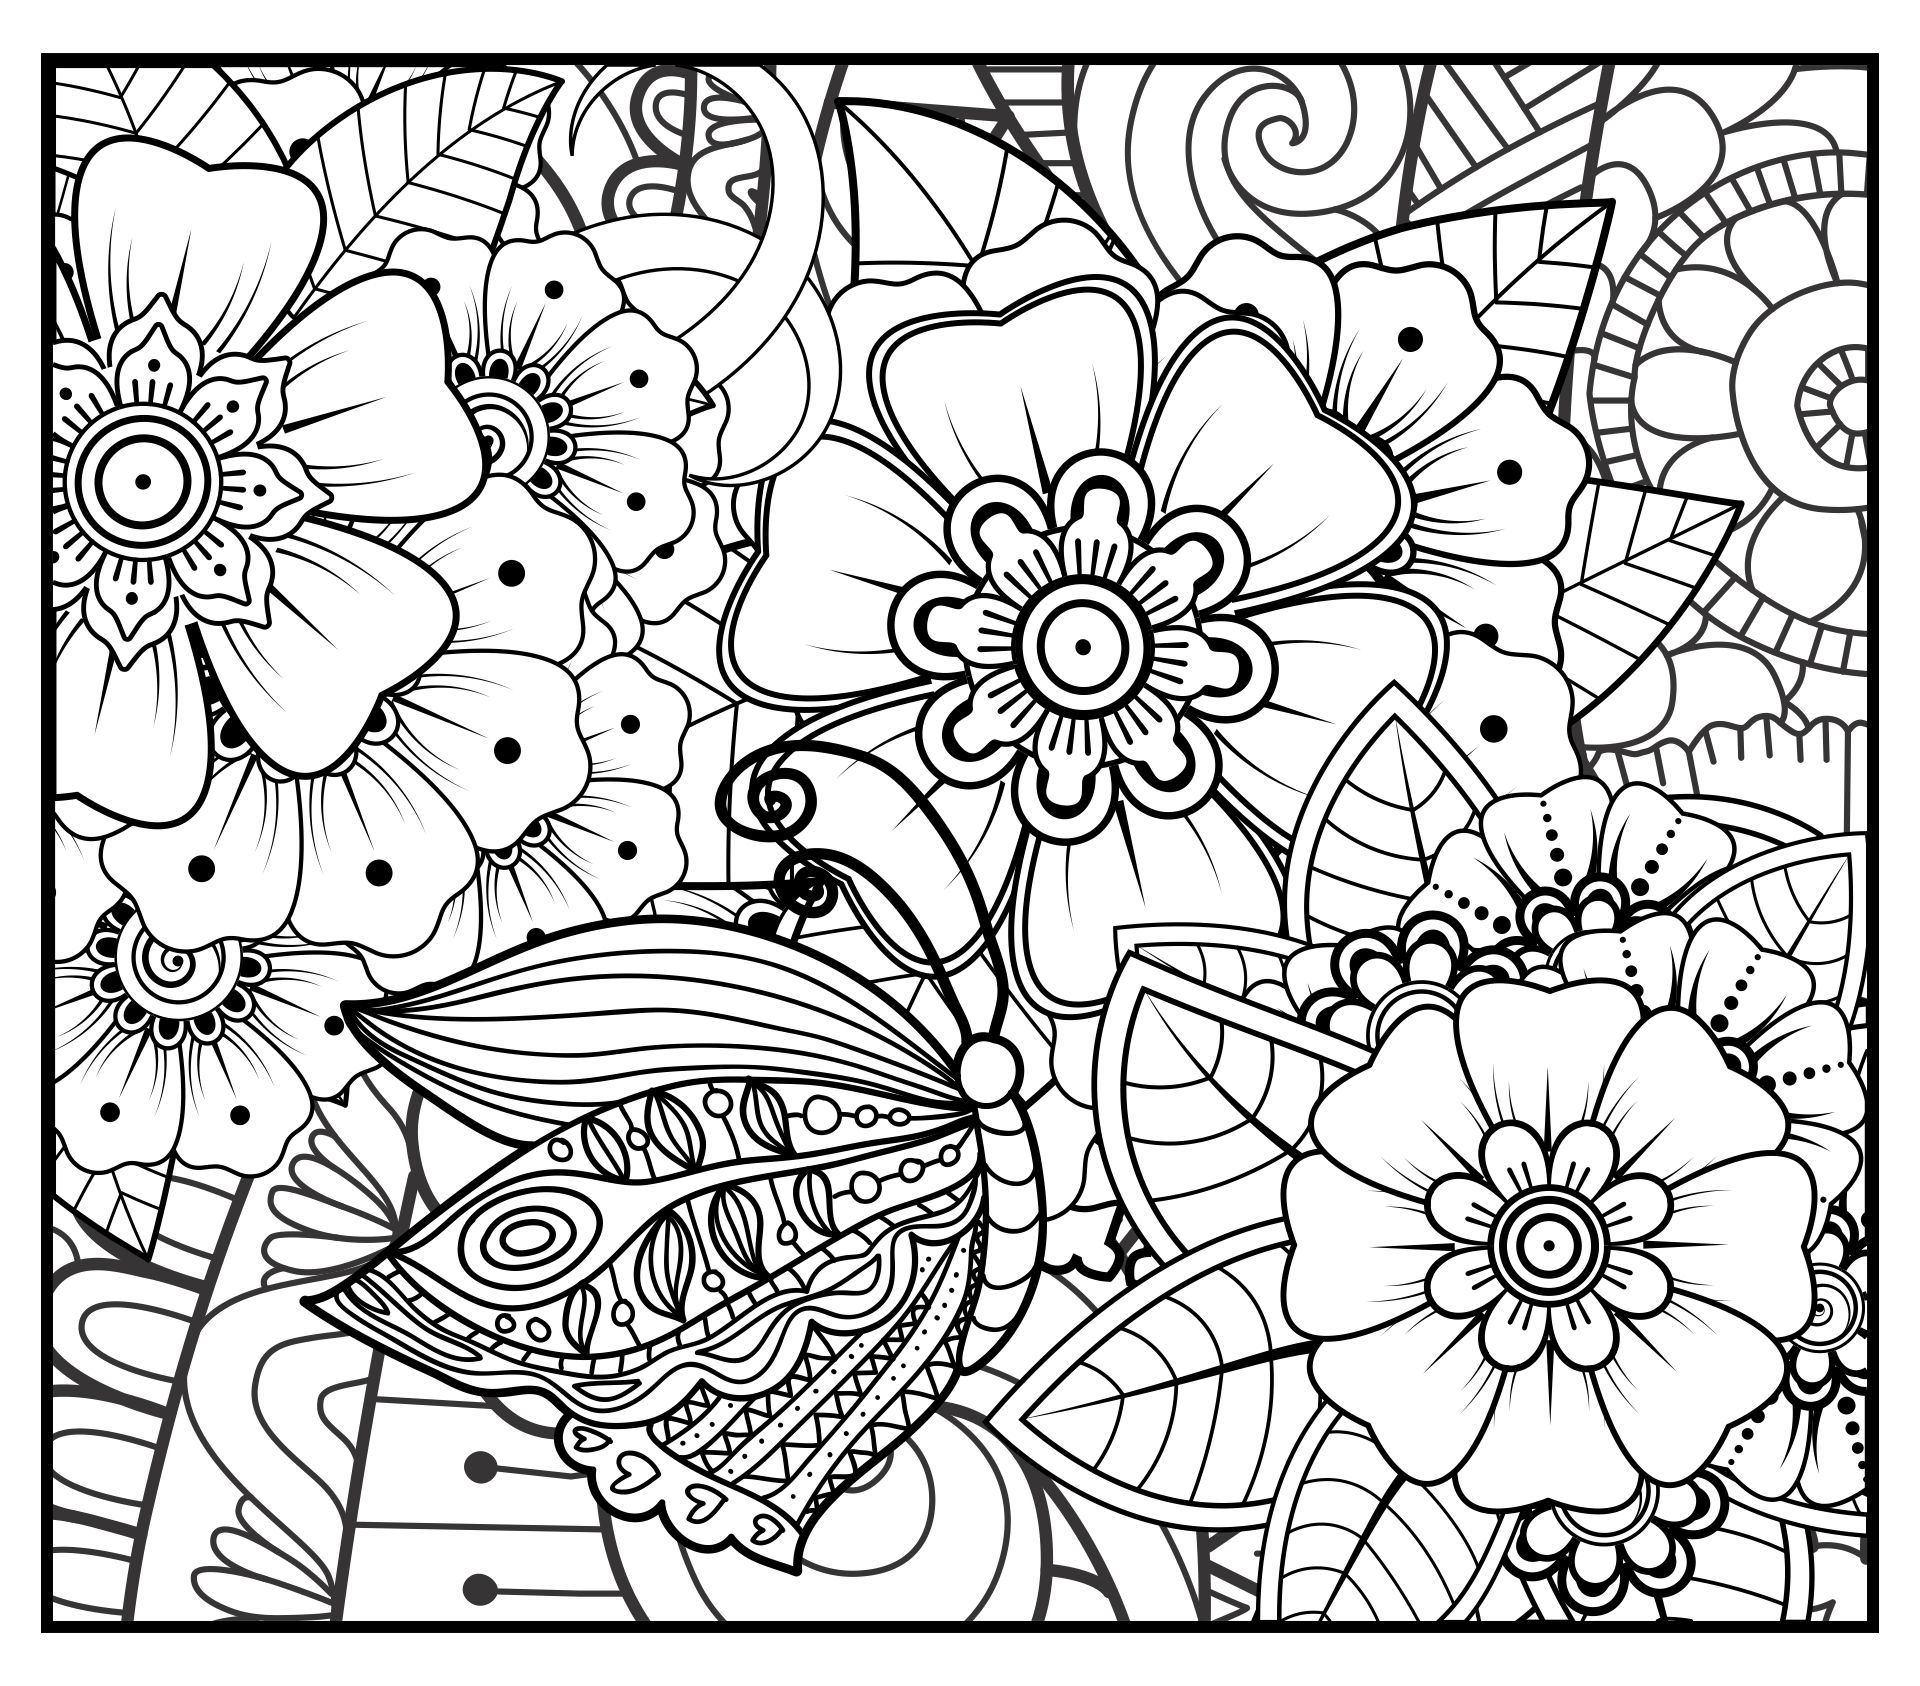 8-best-images-of-printable-coloring-pages-doodle-art-printable-doodle